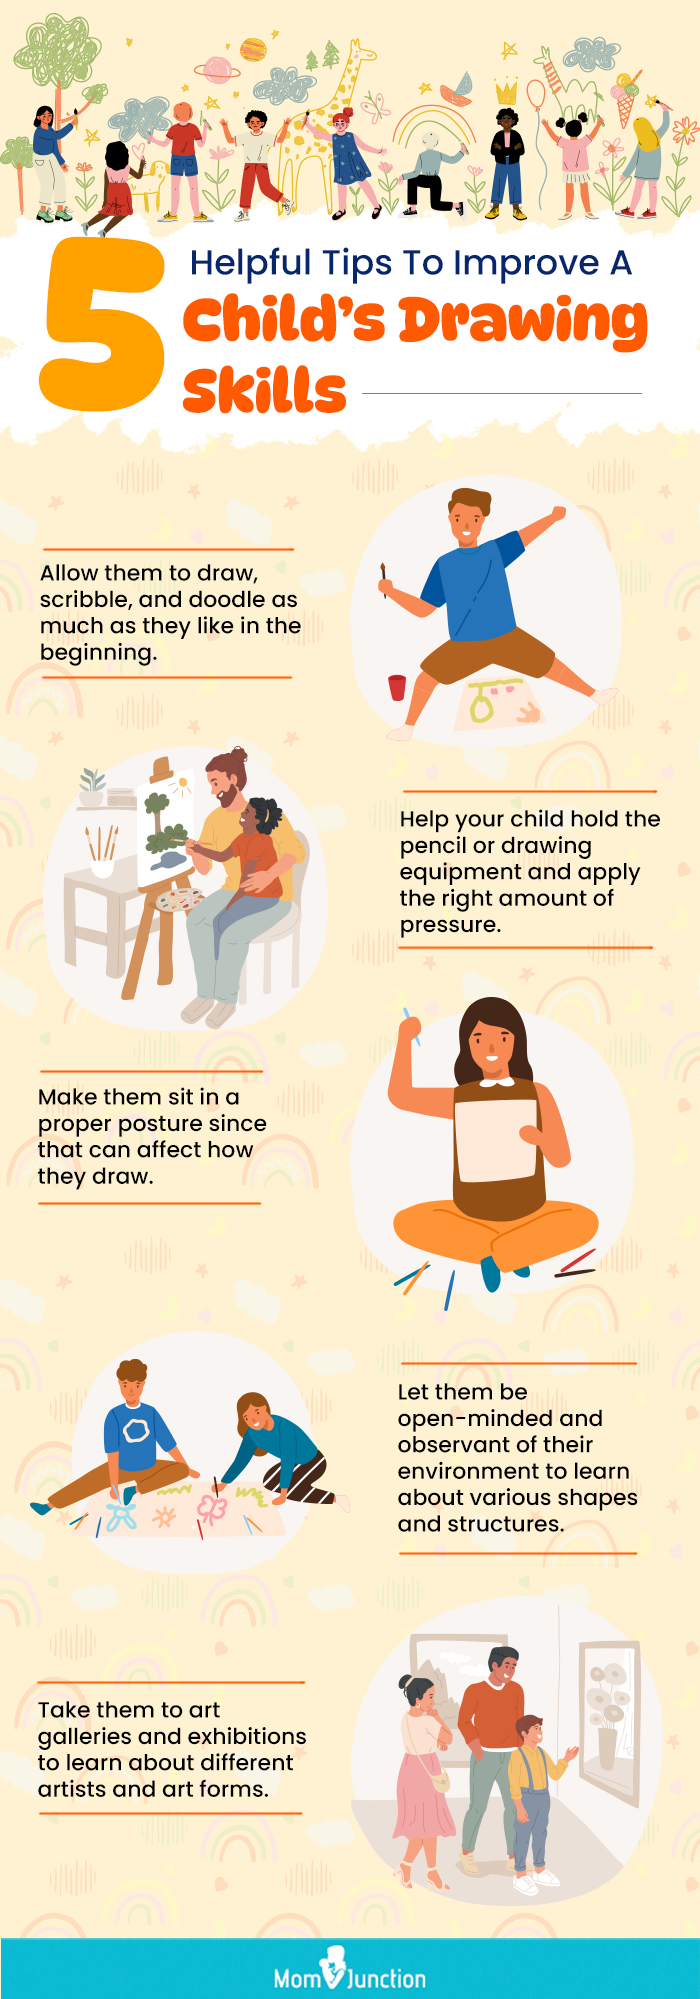 tips for improving a child’s drawing skills (infographic)